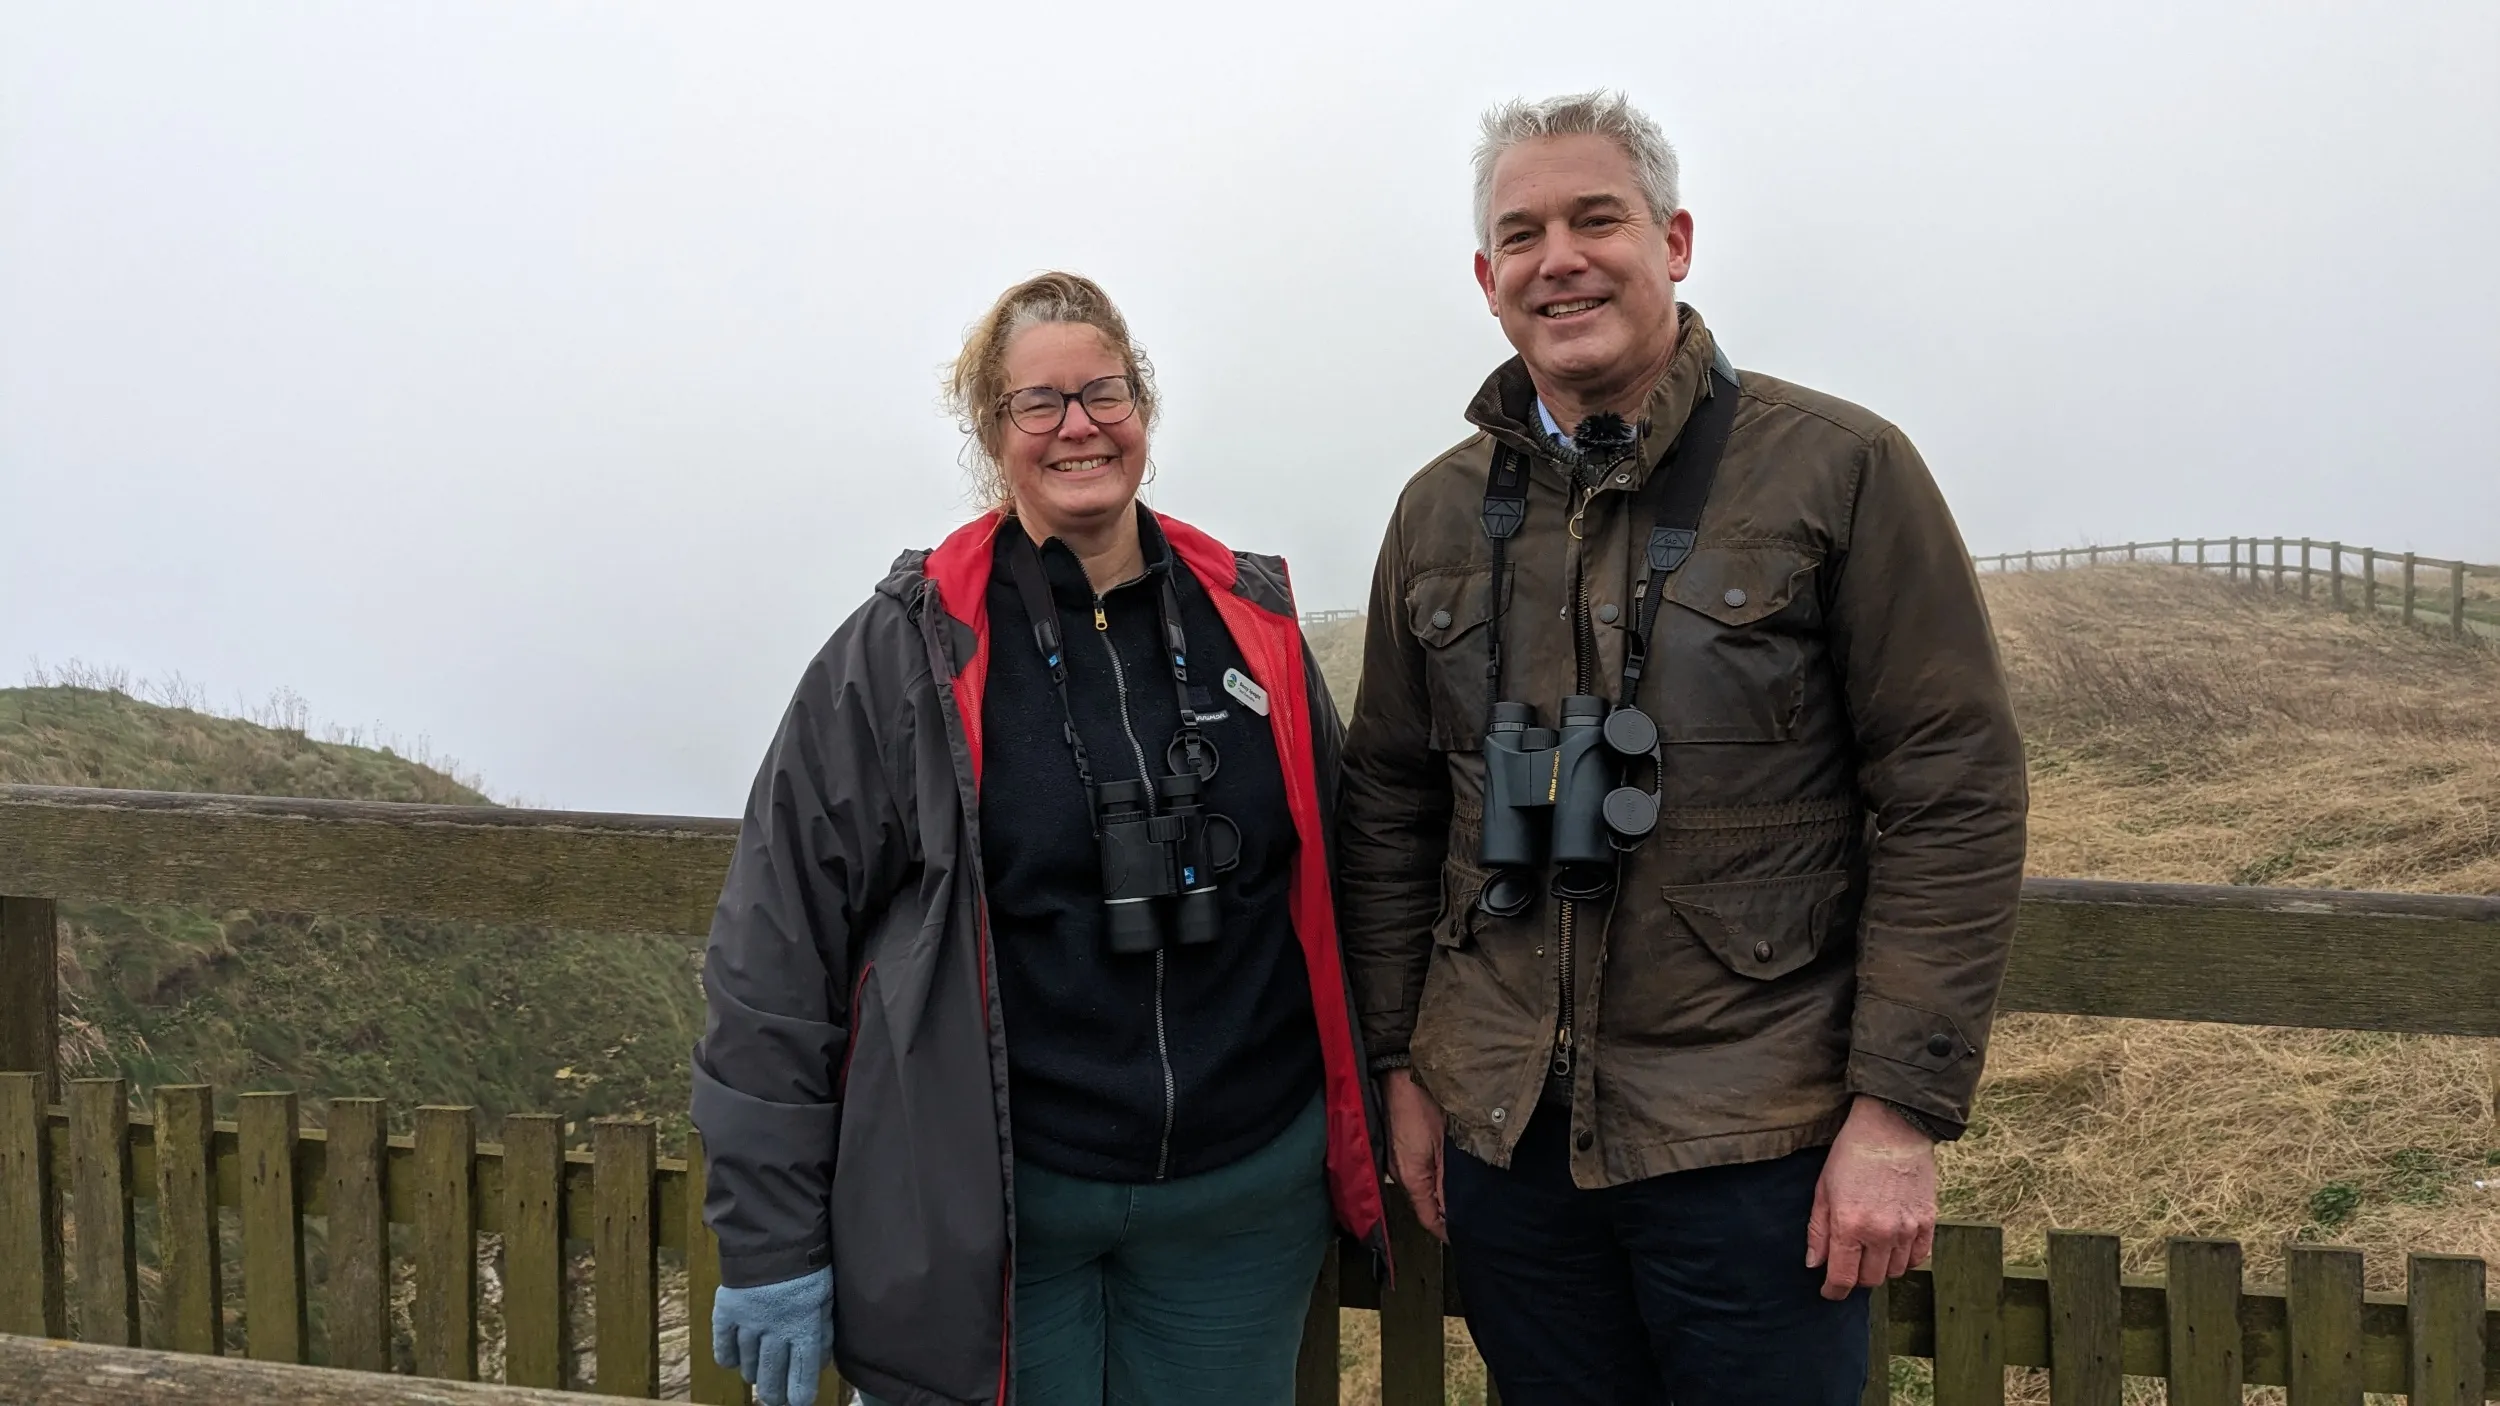 Beccy Speight and Steve Barclay together at Bempton Cliffs